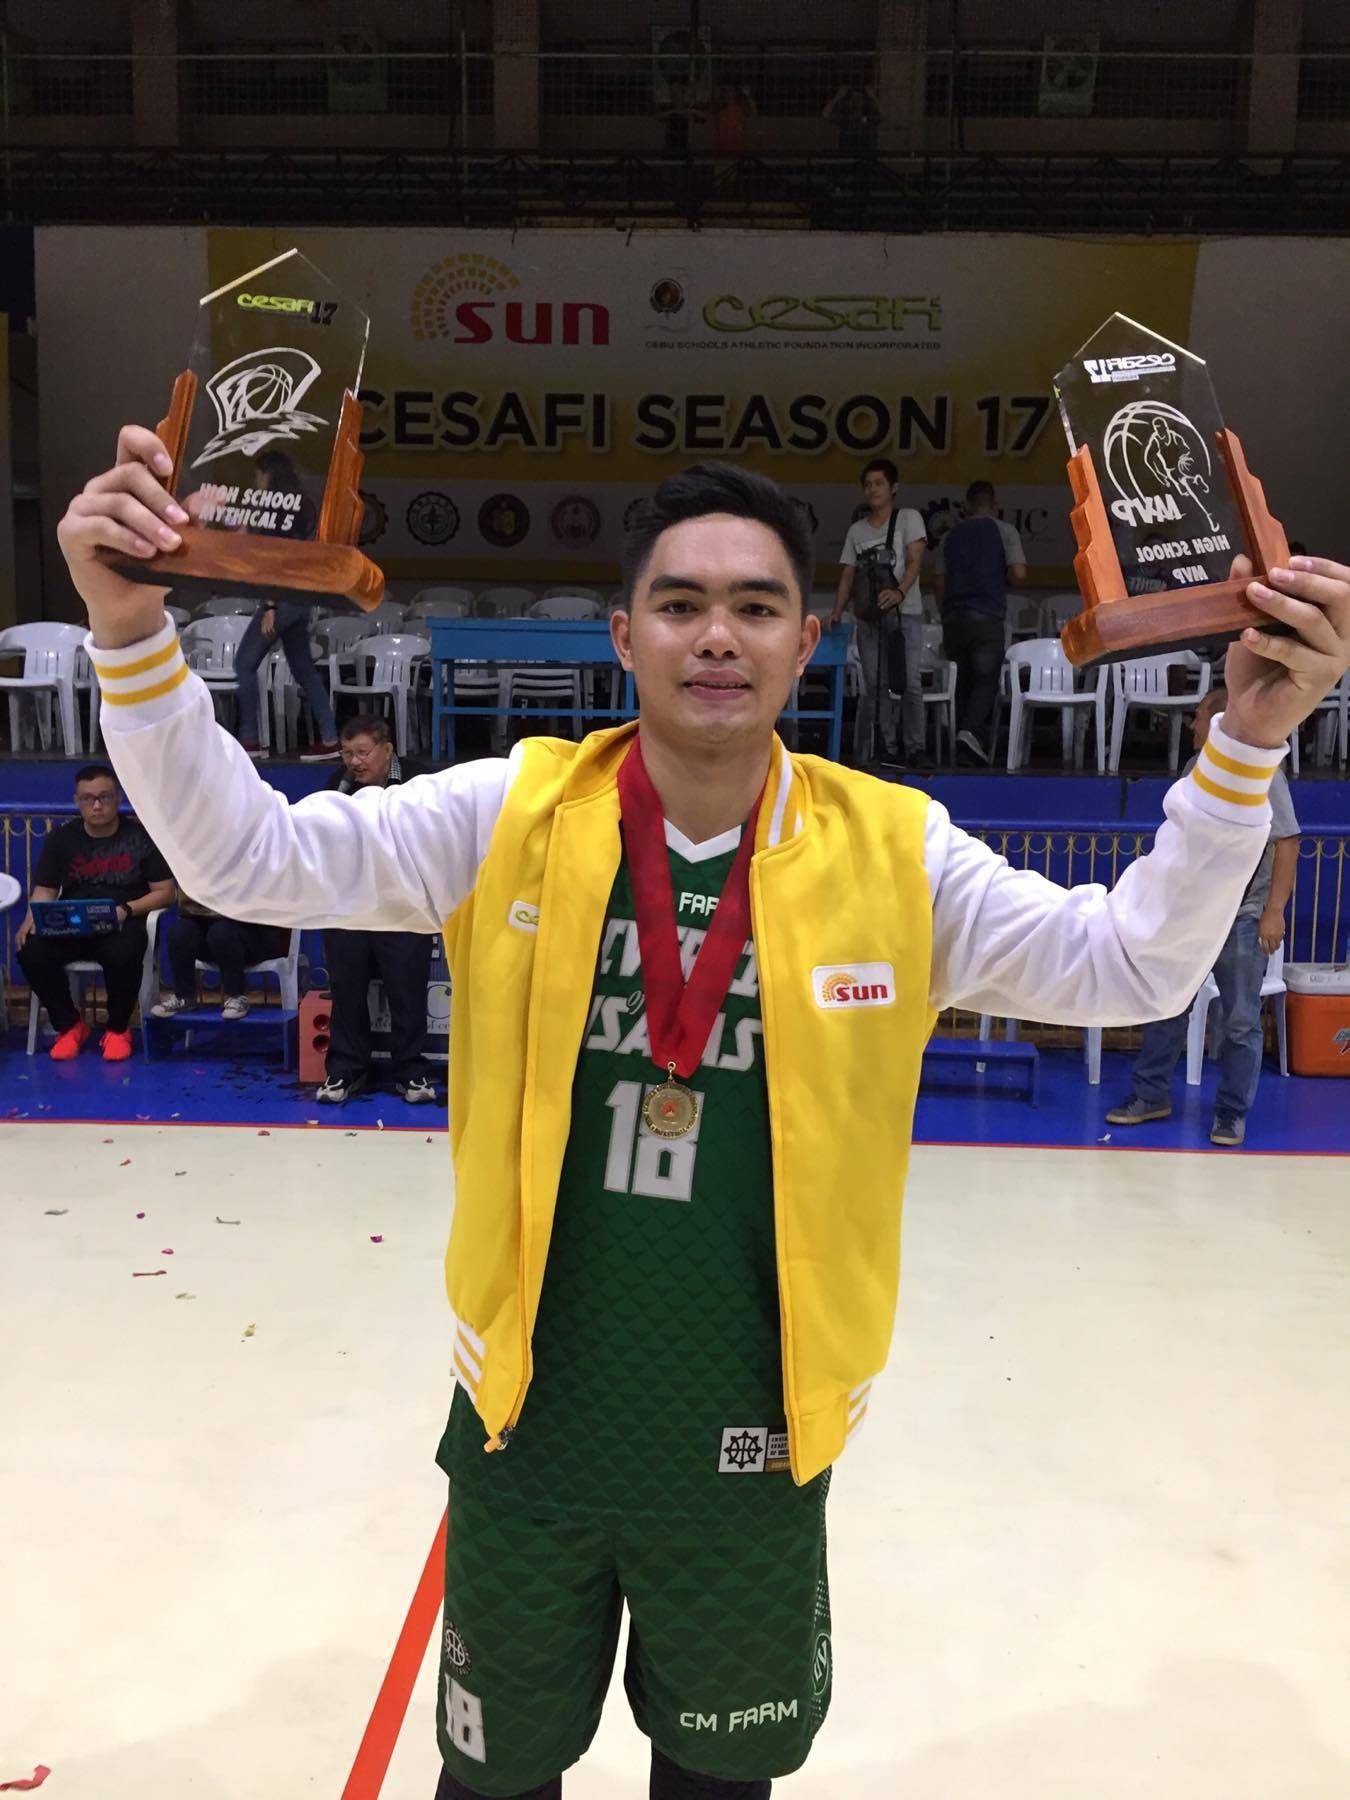 Laurente conquers bad boy image to become CESAFI Junior MVP